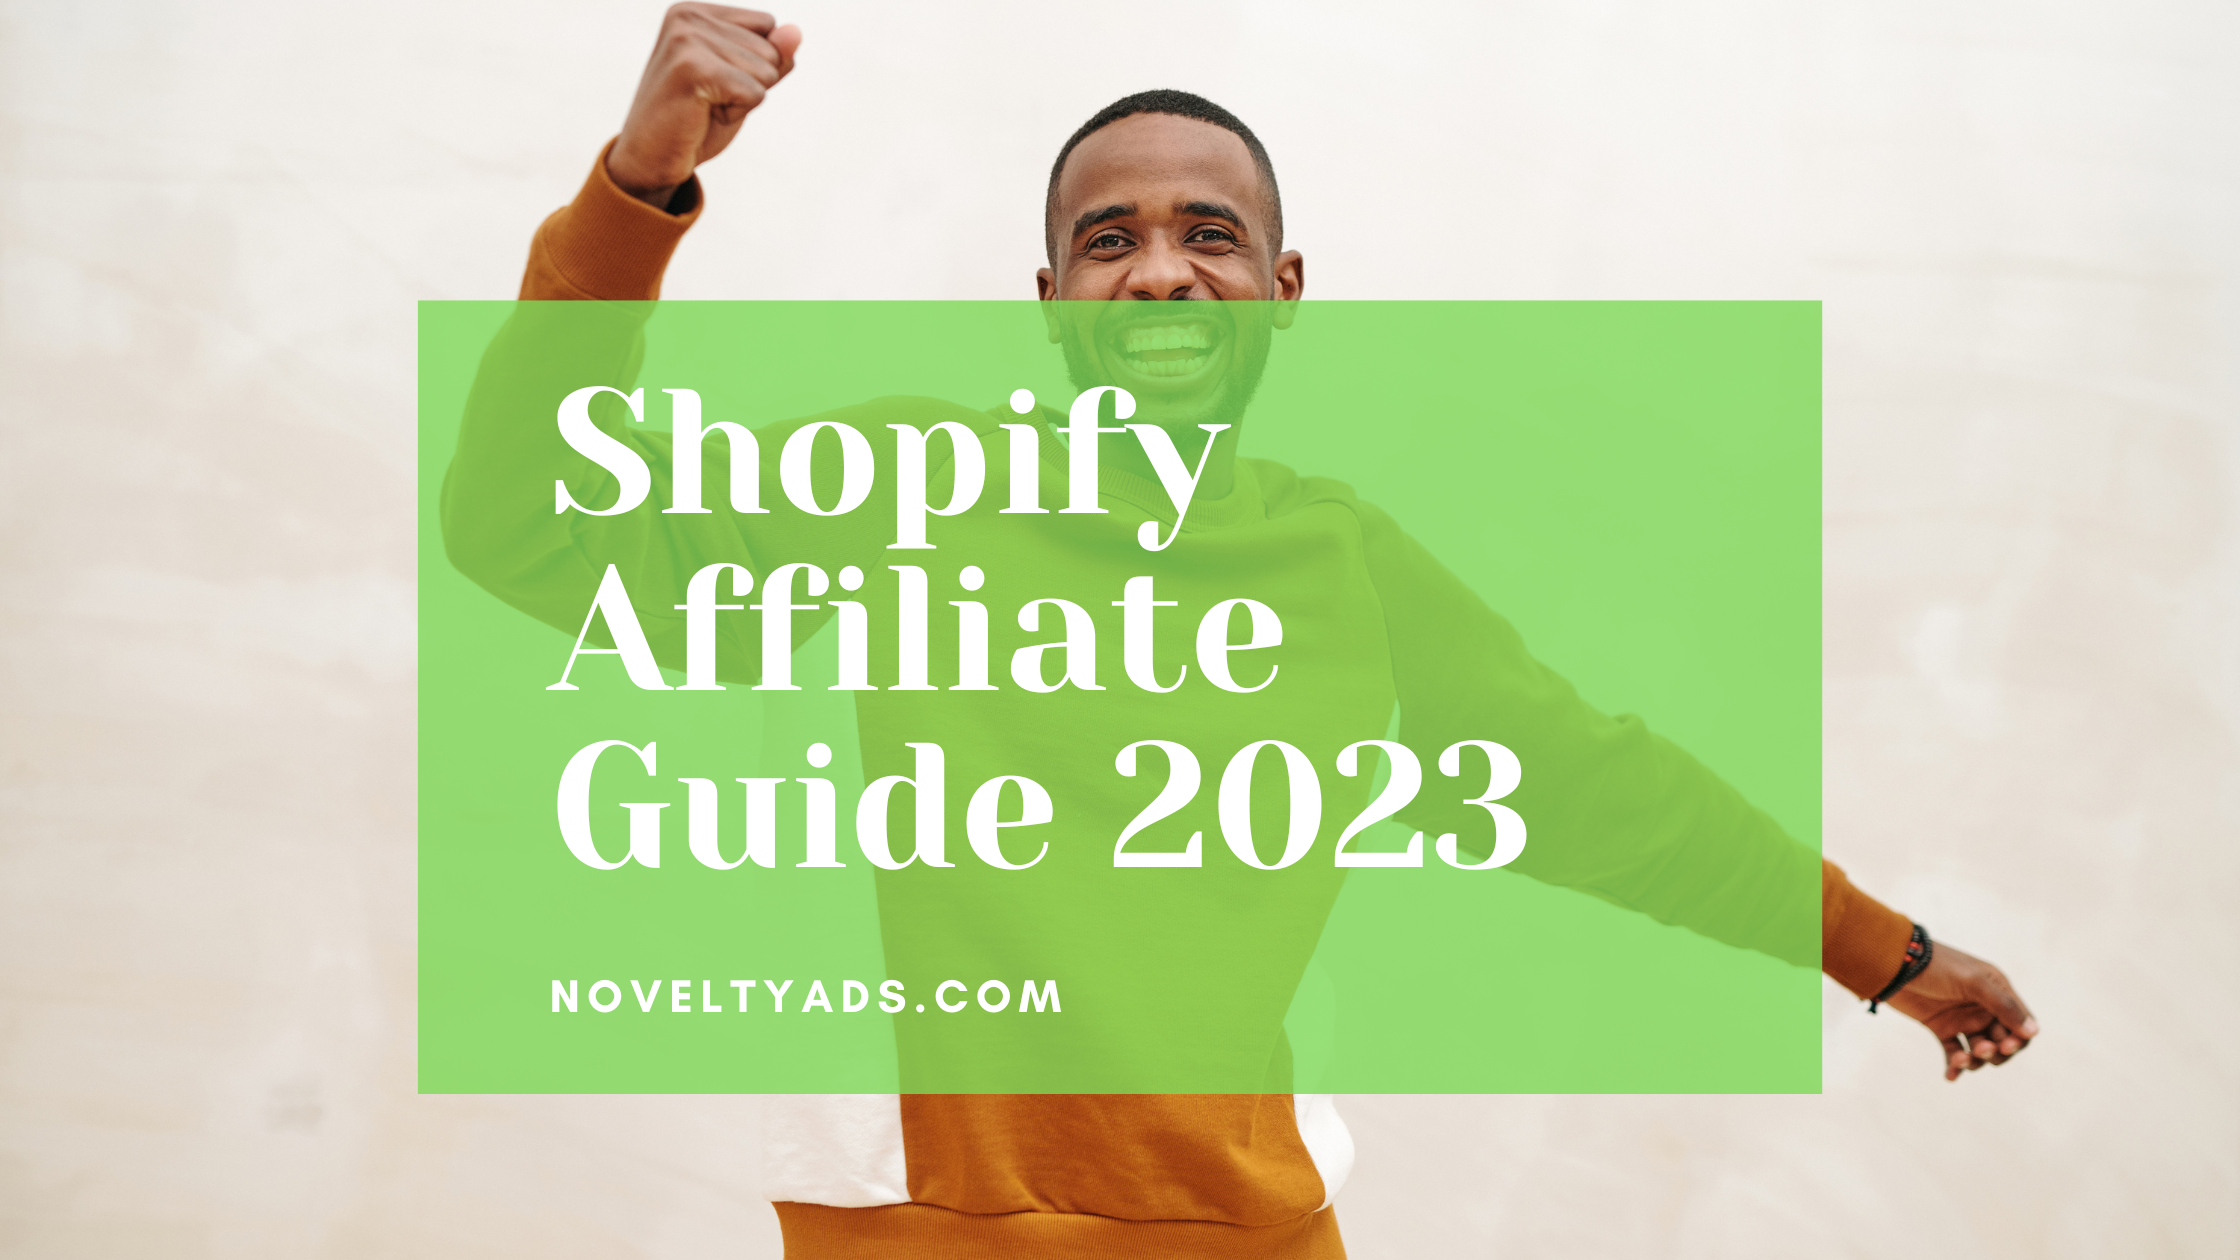 Shopify Affiliate Guide 2023